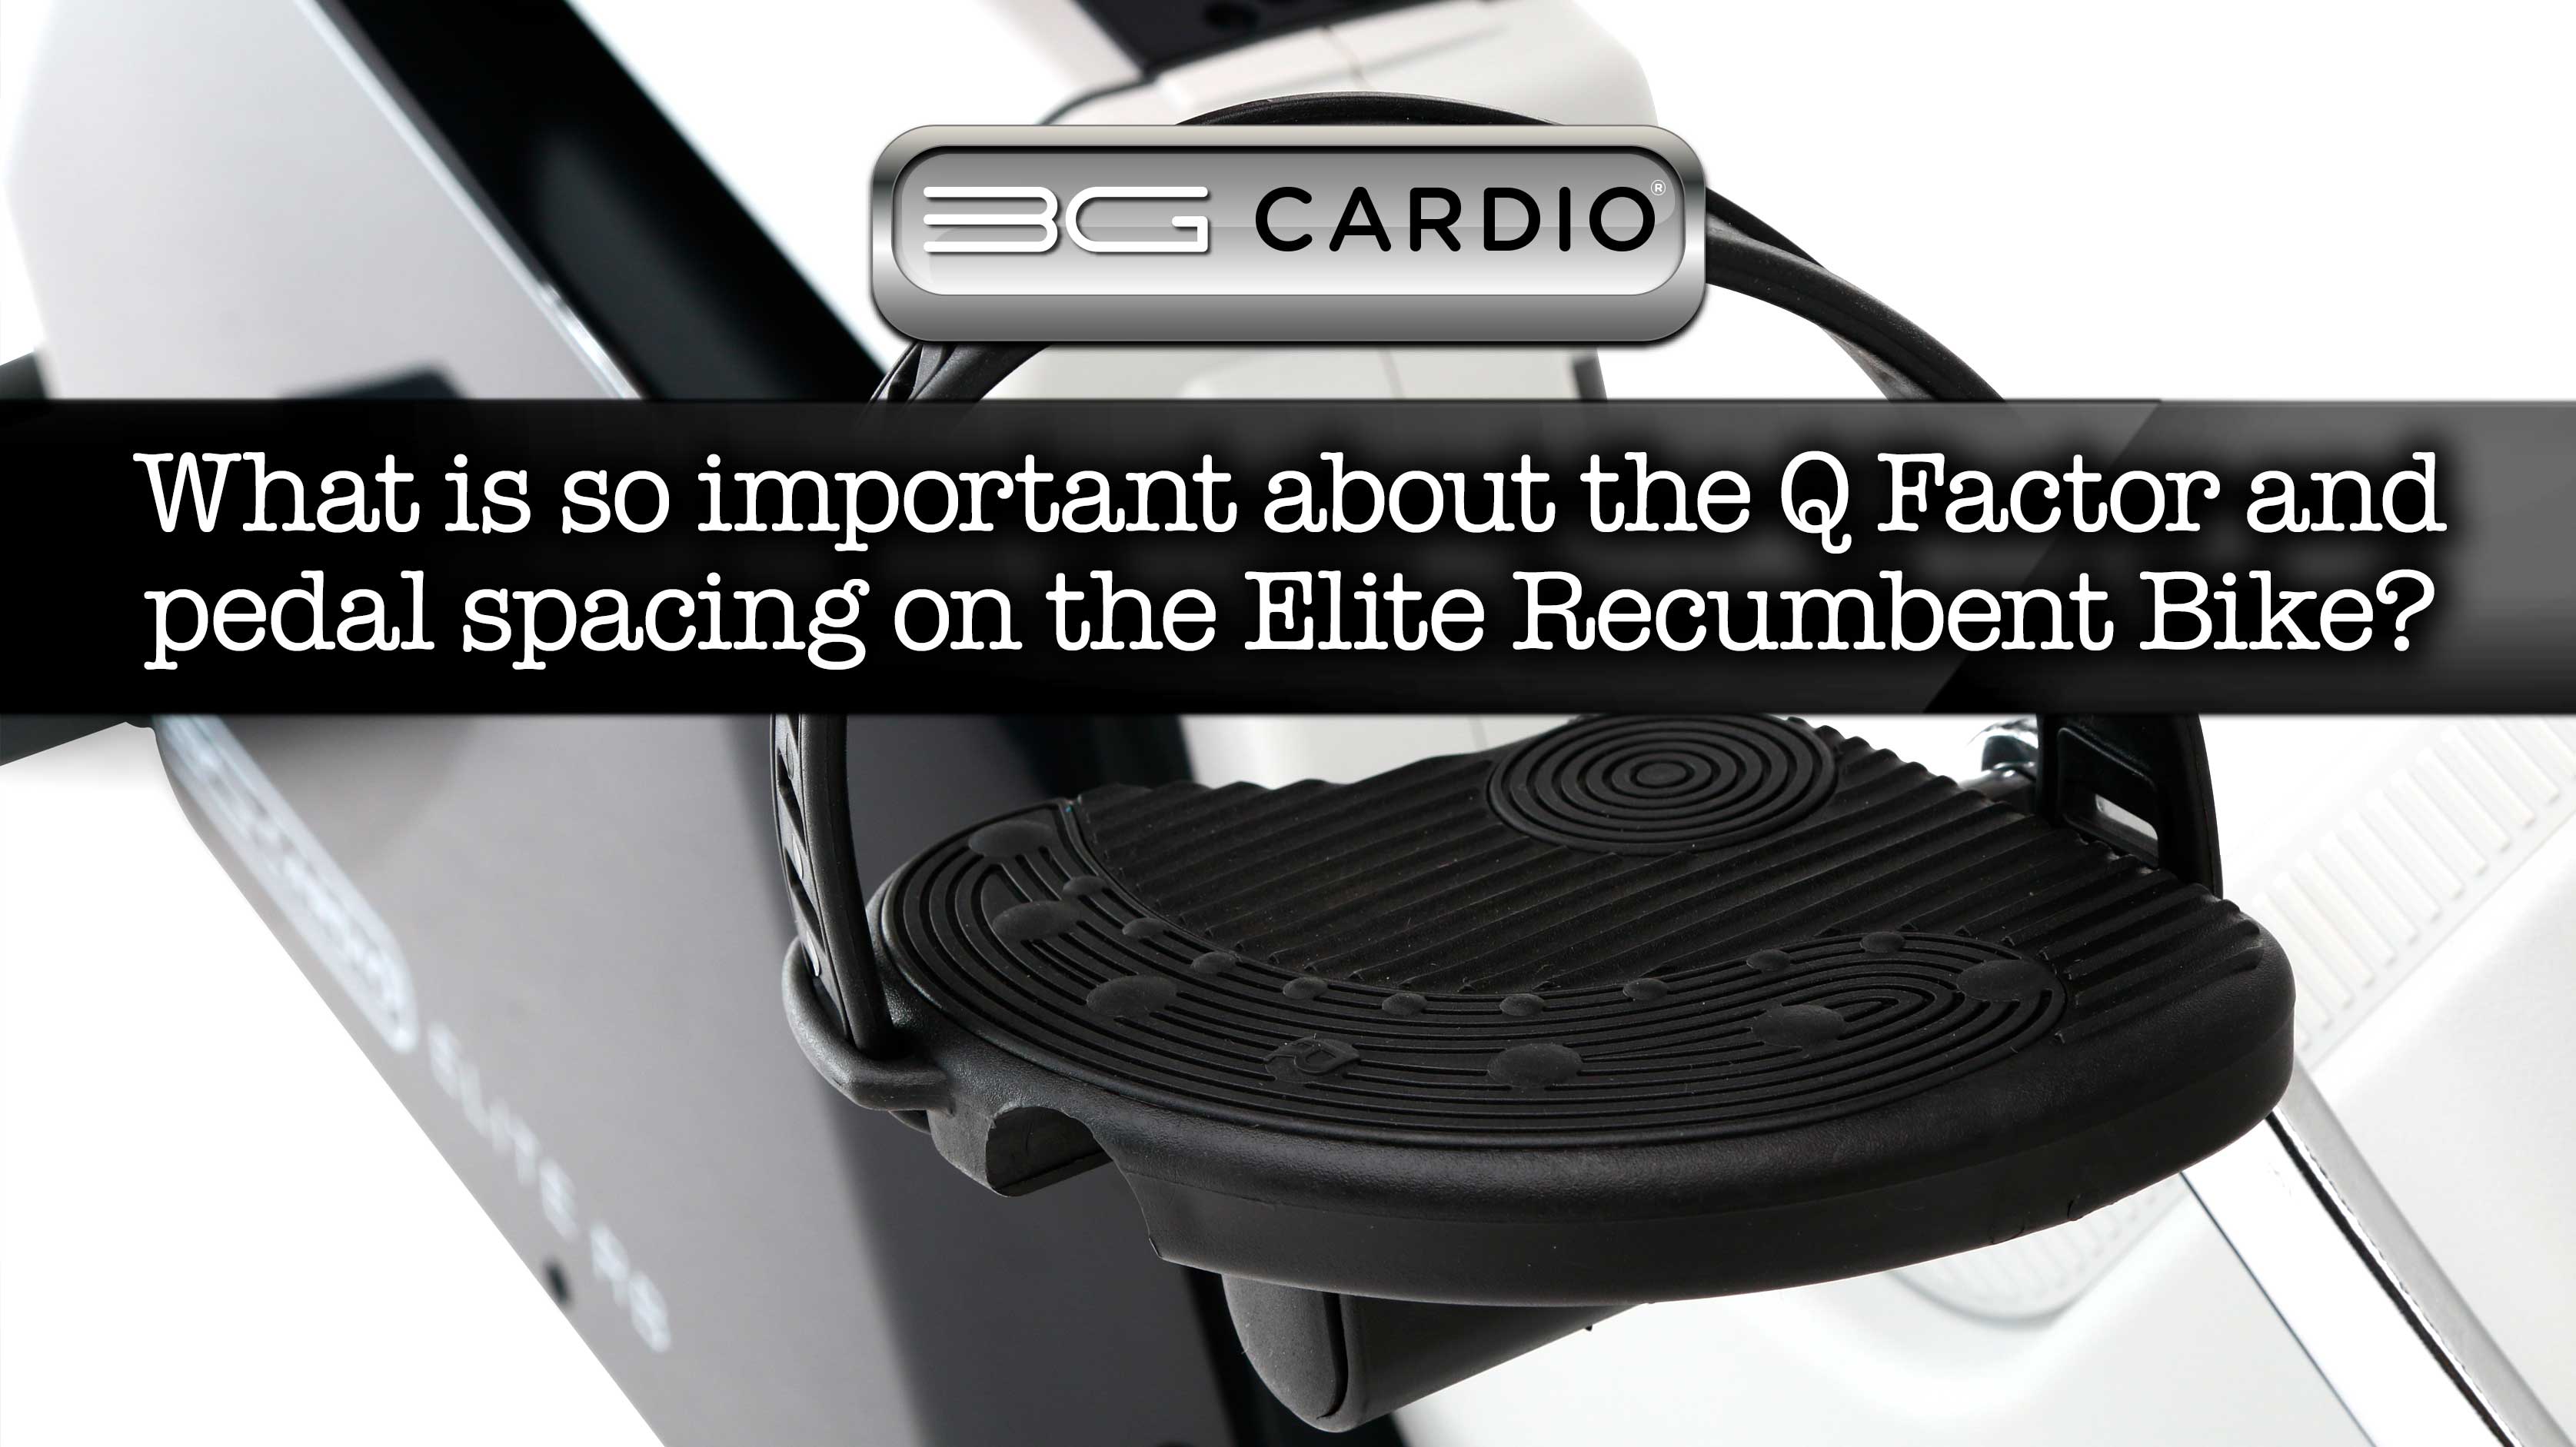 What is so important about the Q Factor and pedal spacing on the Elite Recumbent Bike?